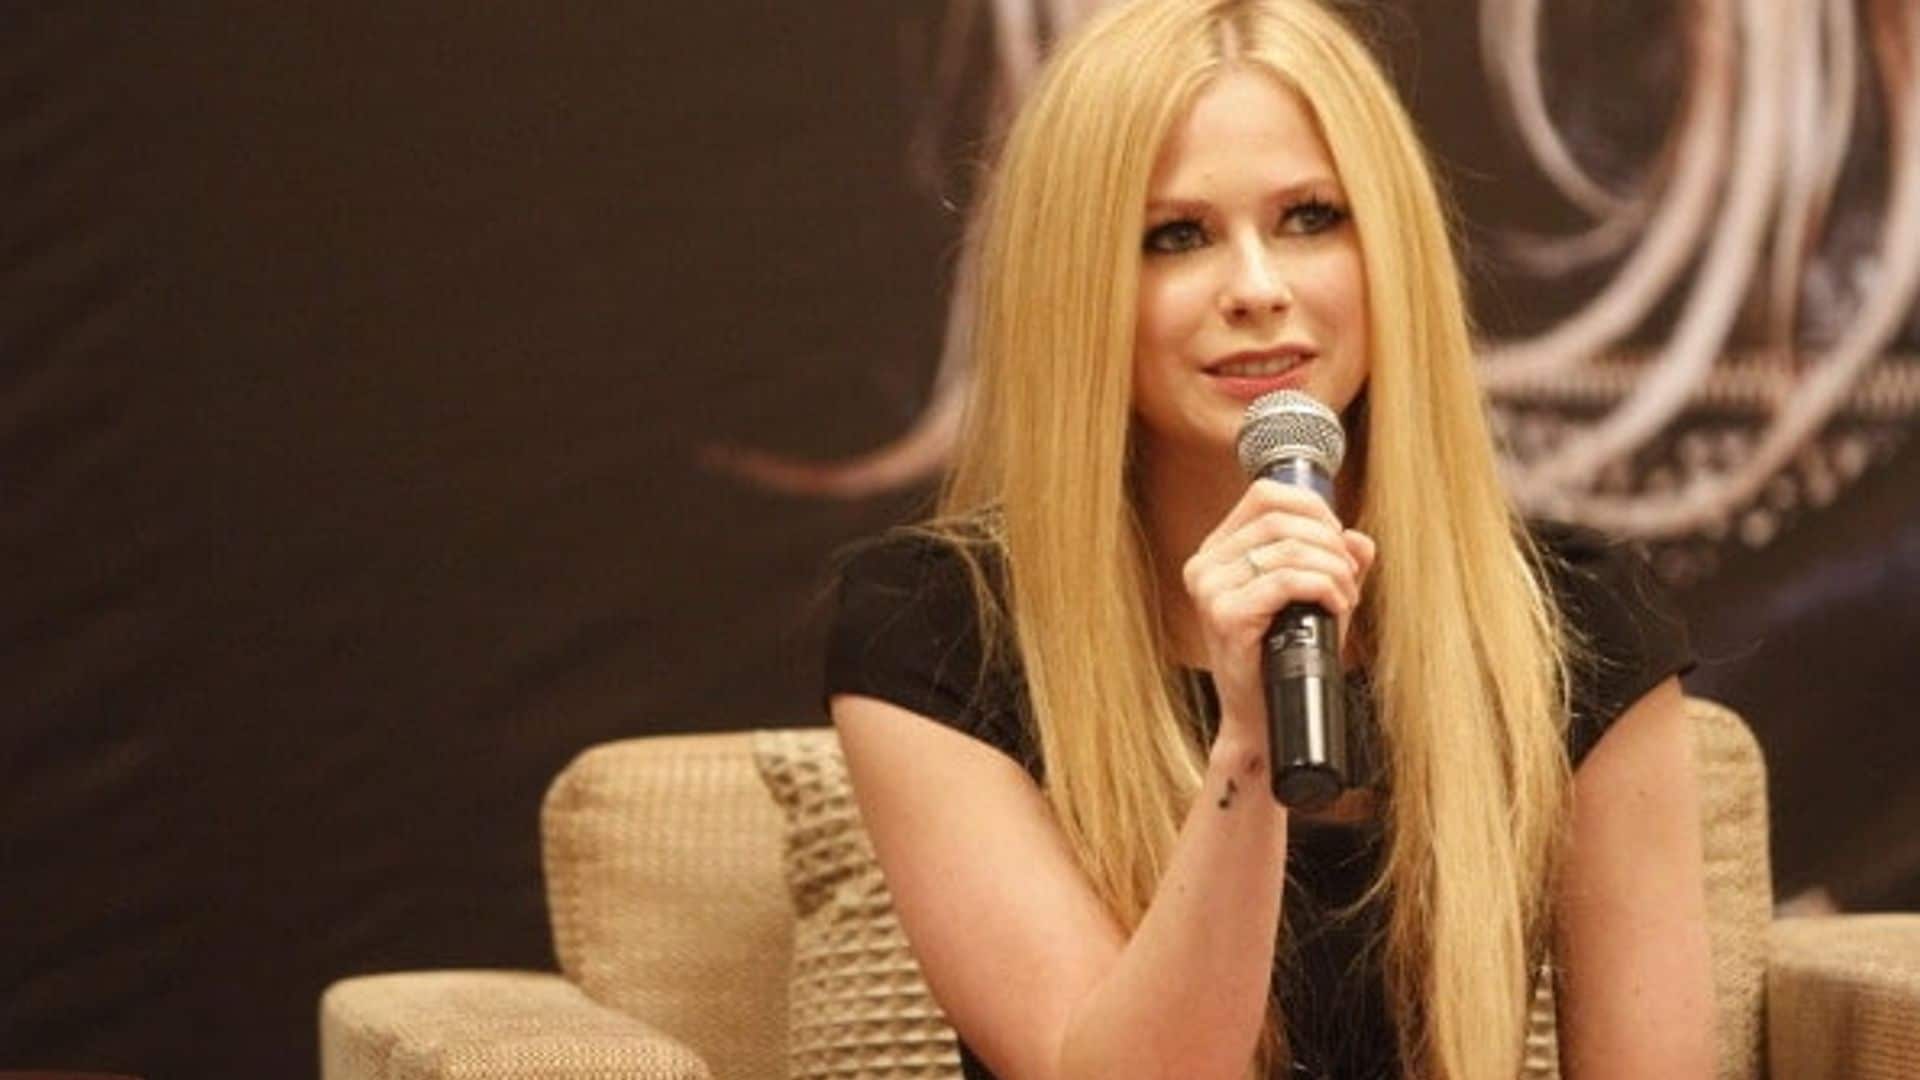 Avril Lavigne gives update on battle with Lyme disease: 'Don't give up'